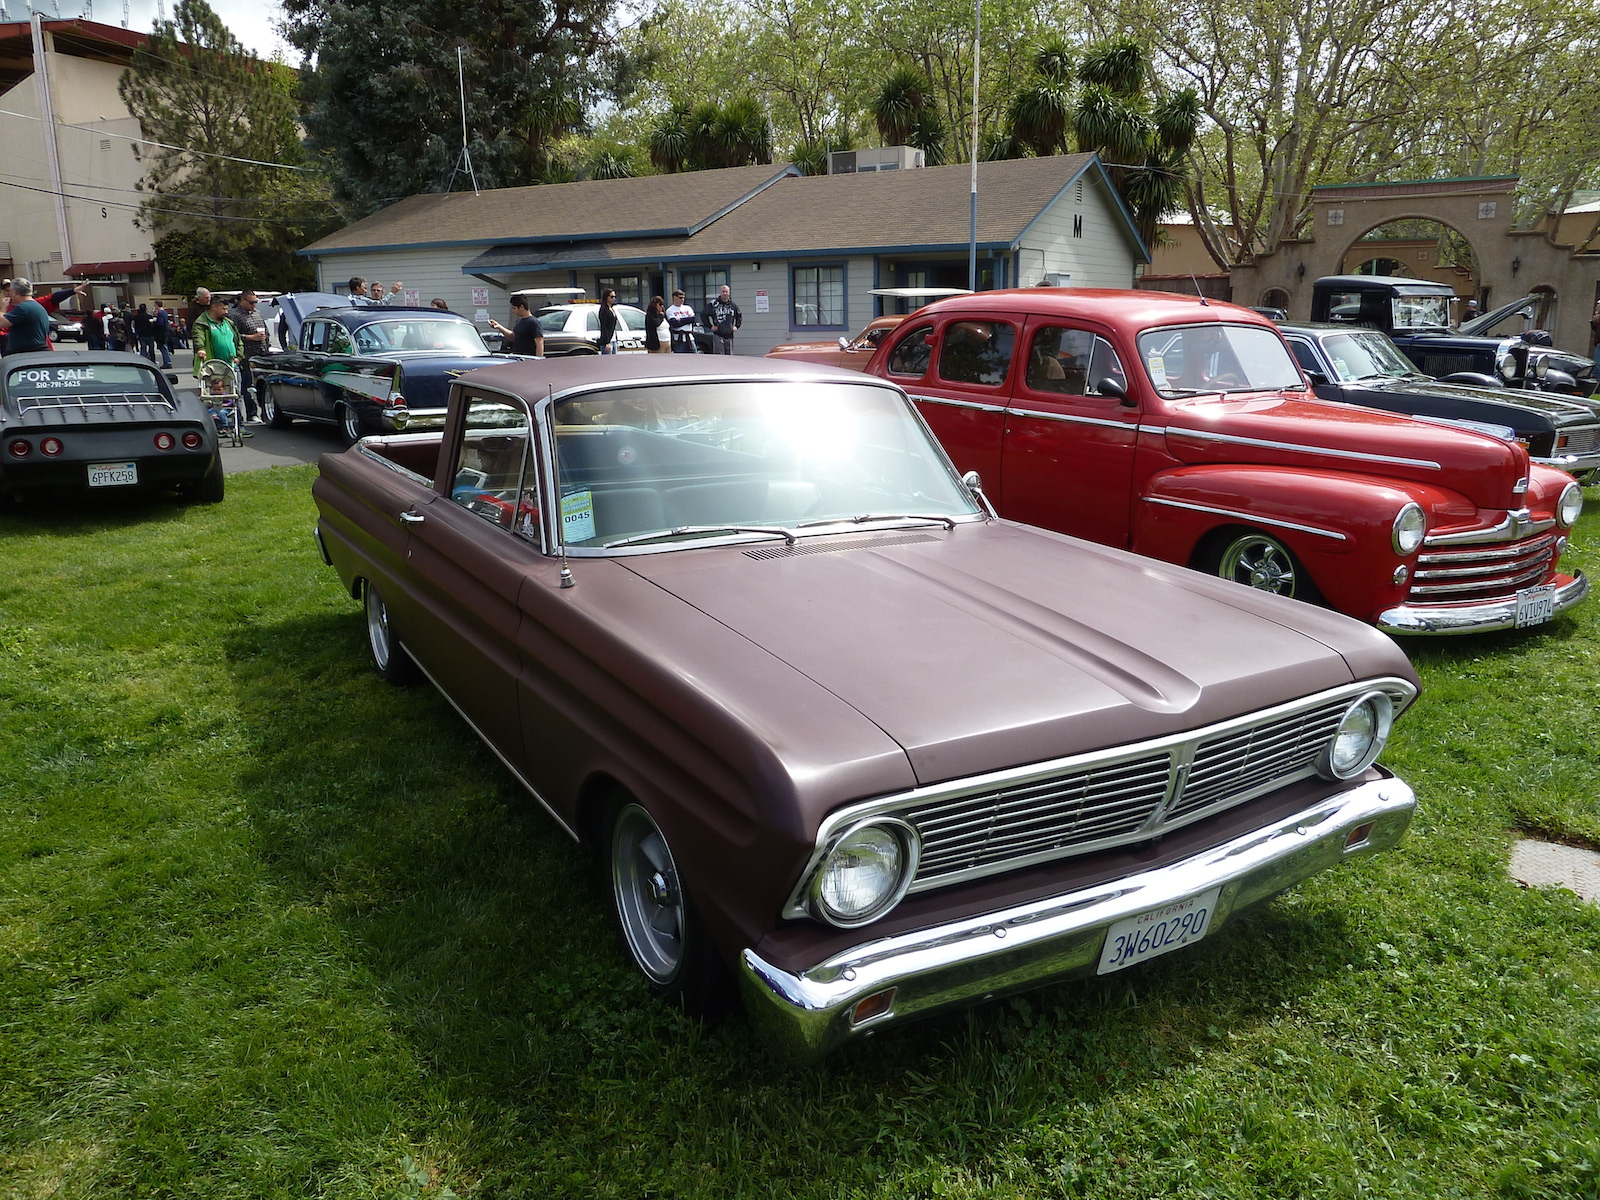 Chevrolet El Camino And Ford Ranchero - What's In A Name?